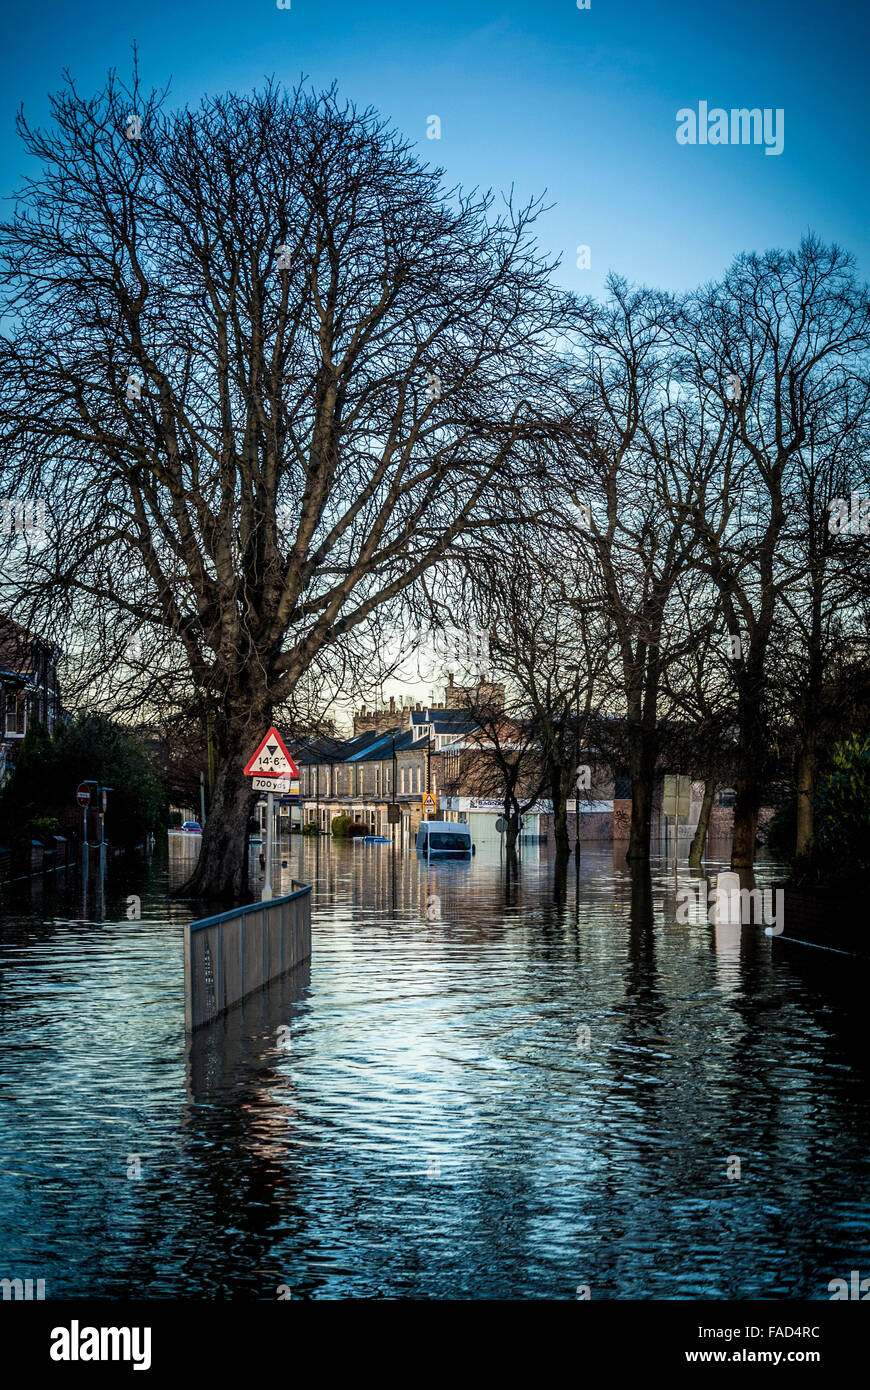 York, UK. 27th December, 2015. Widespread disruption continues in York due to flooding of the River Ouse and River Foss.  Huntington Road, one of the most affected areas where residents have been evacuated. Photo Bailey-Cooper Photography/Alamy Live News Stock Photo